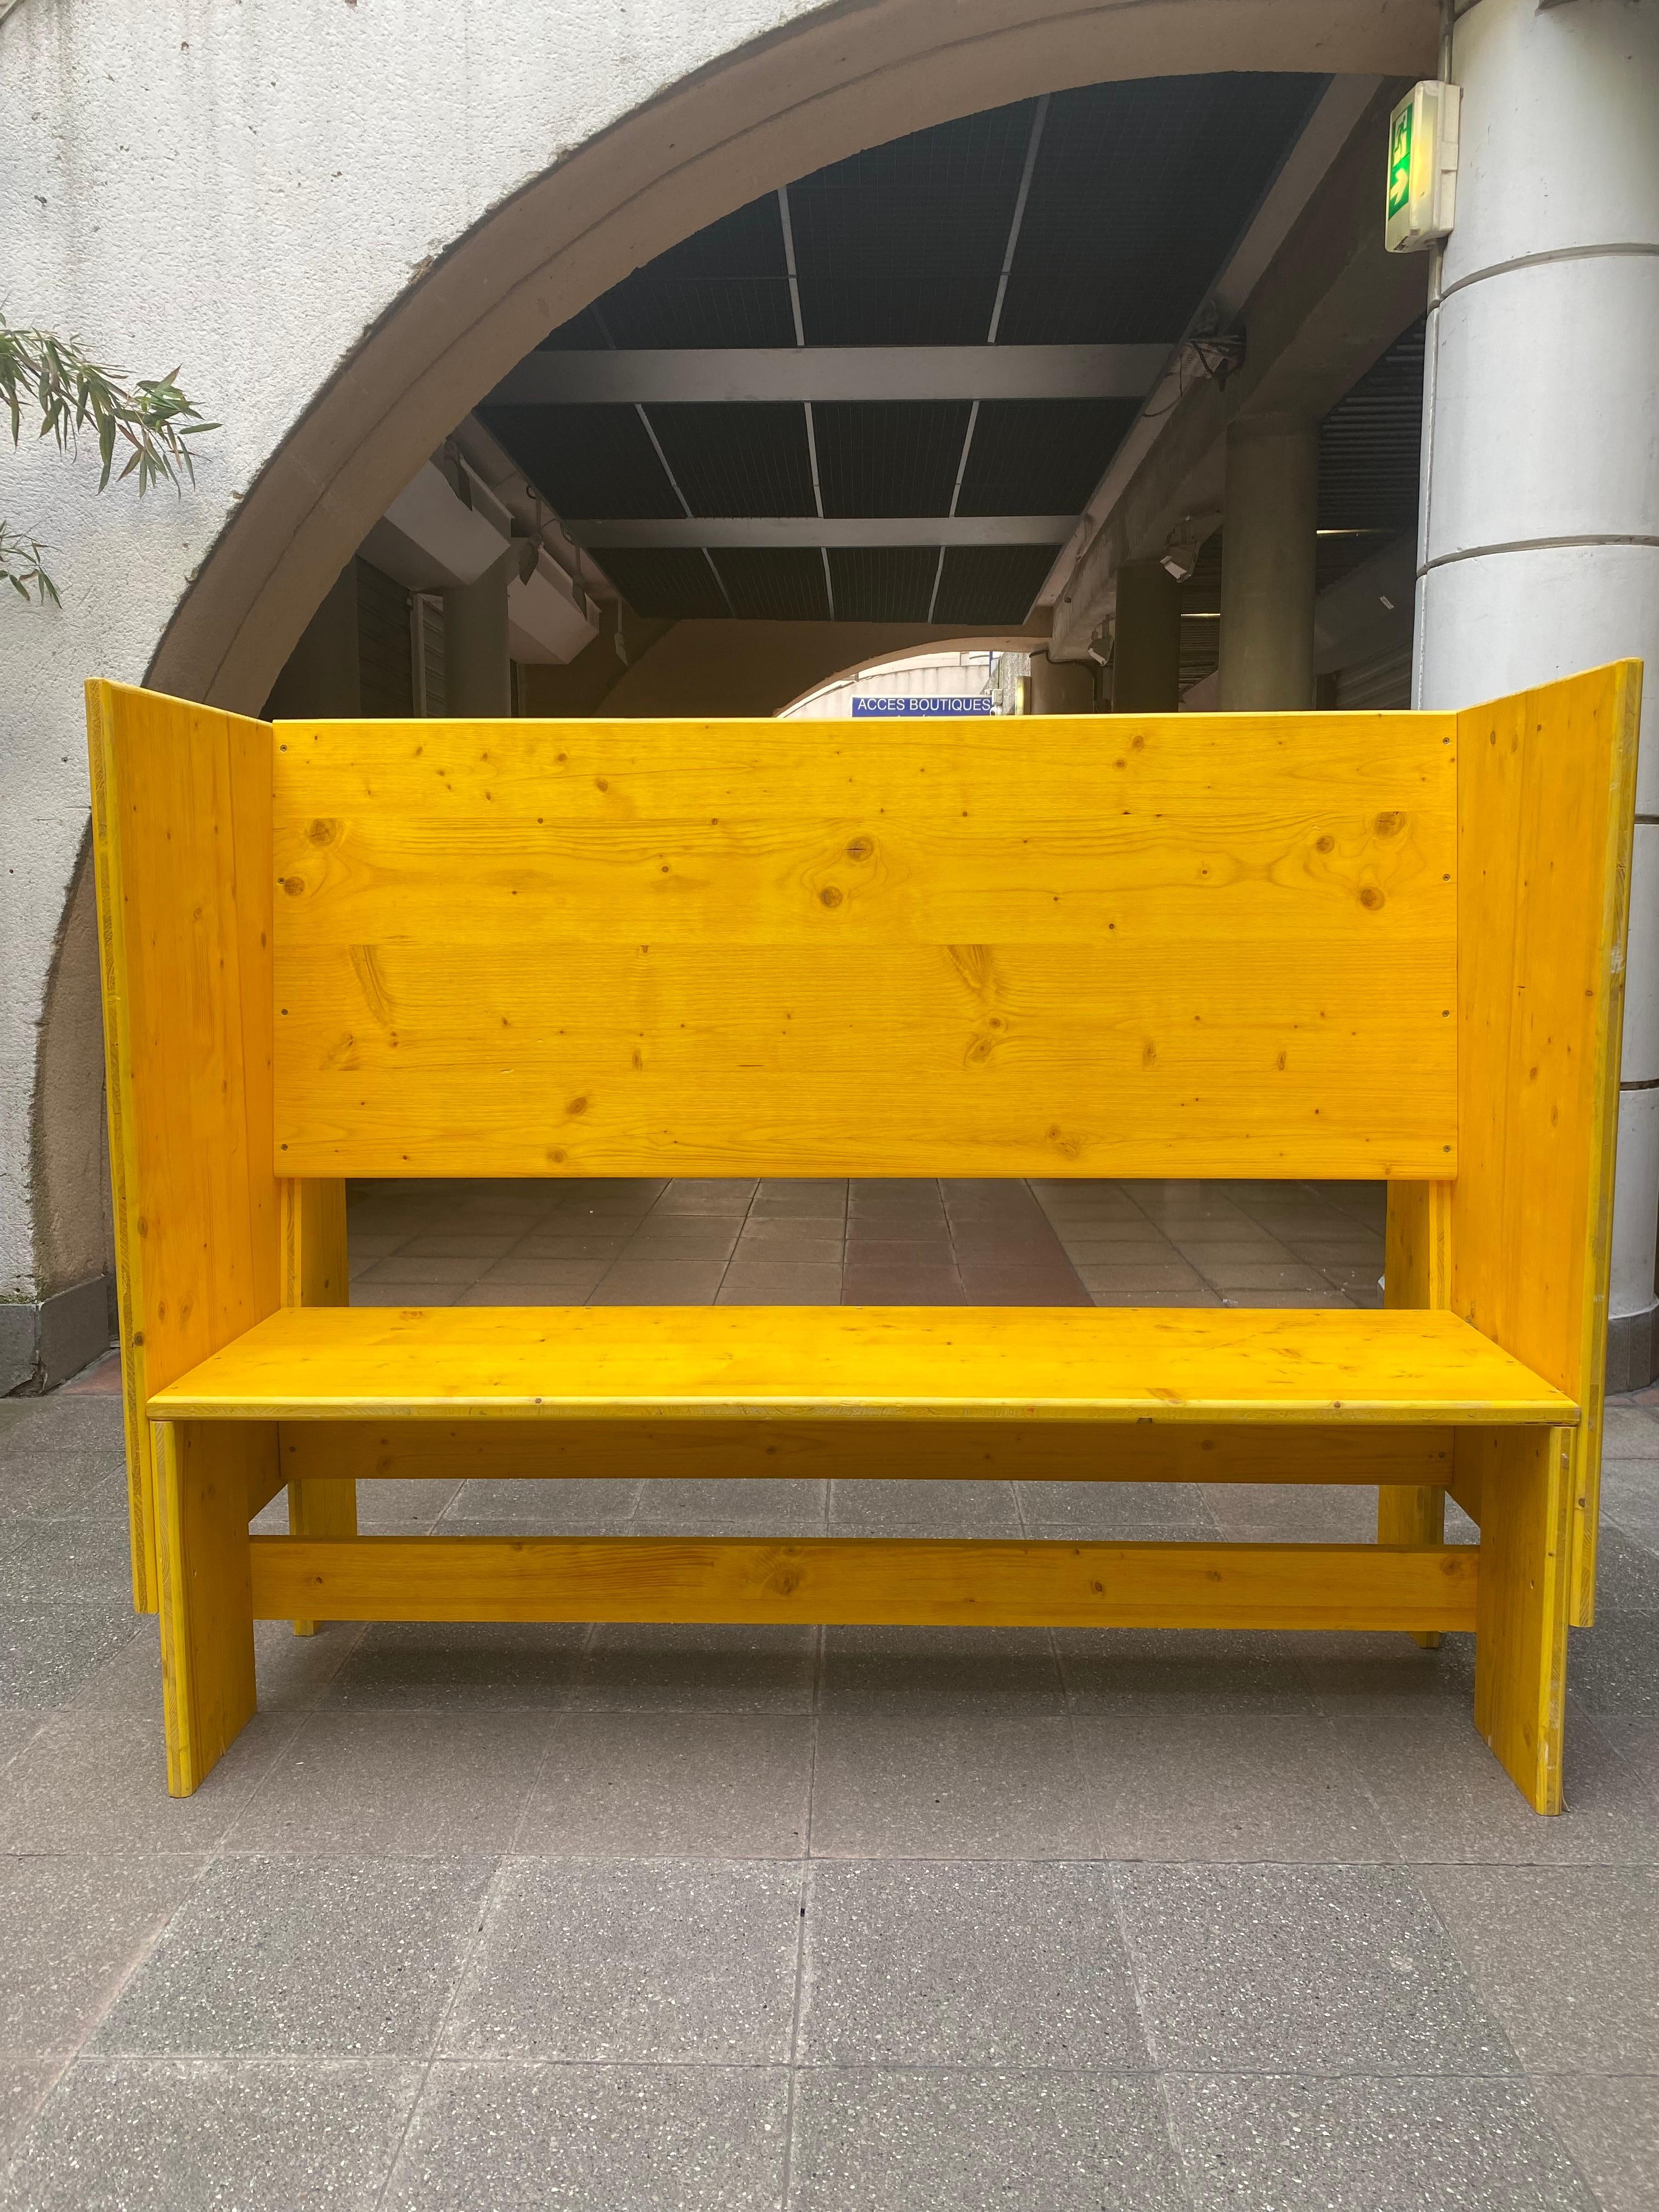 Inessa Hansch.
Bench called Alcôve - circa 2010.
From the Seguin collection.
Preformed and triple folded formwork panel.
Material: melamine resin.
Designed for the Ile Seguin temporary garden project in Boulogne Billancourt.
Limited edition of